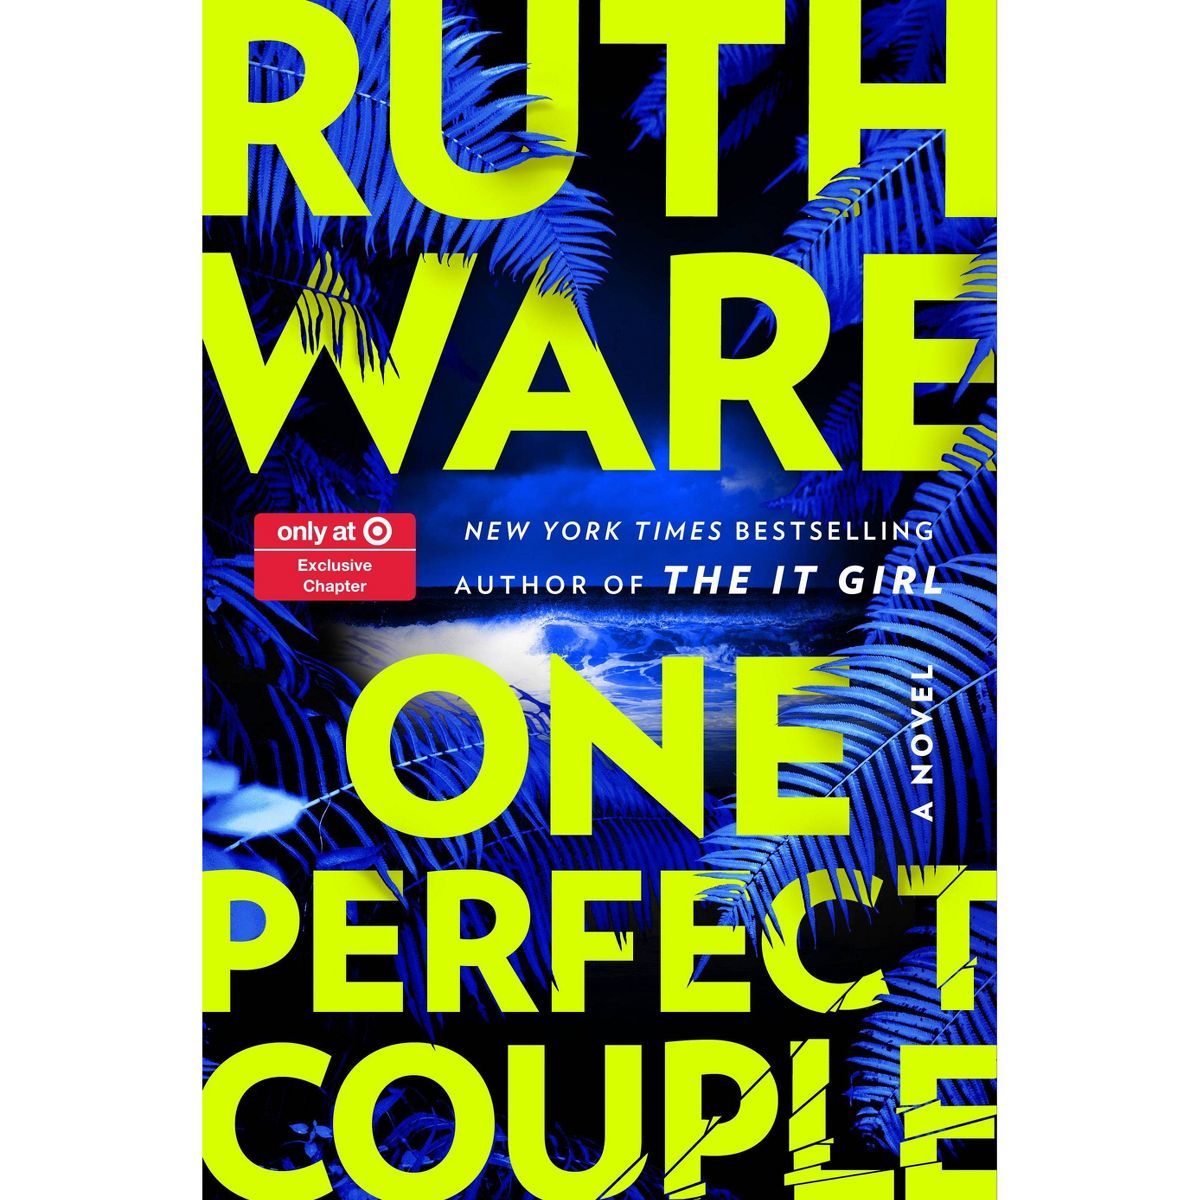 One Perfect Couple - Target Exclusive Edition - by Ruth Ware (Hardcover) | Target